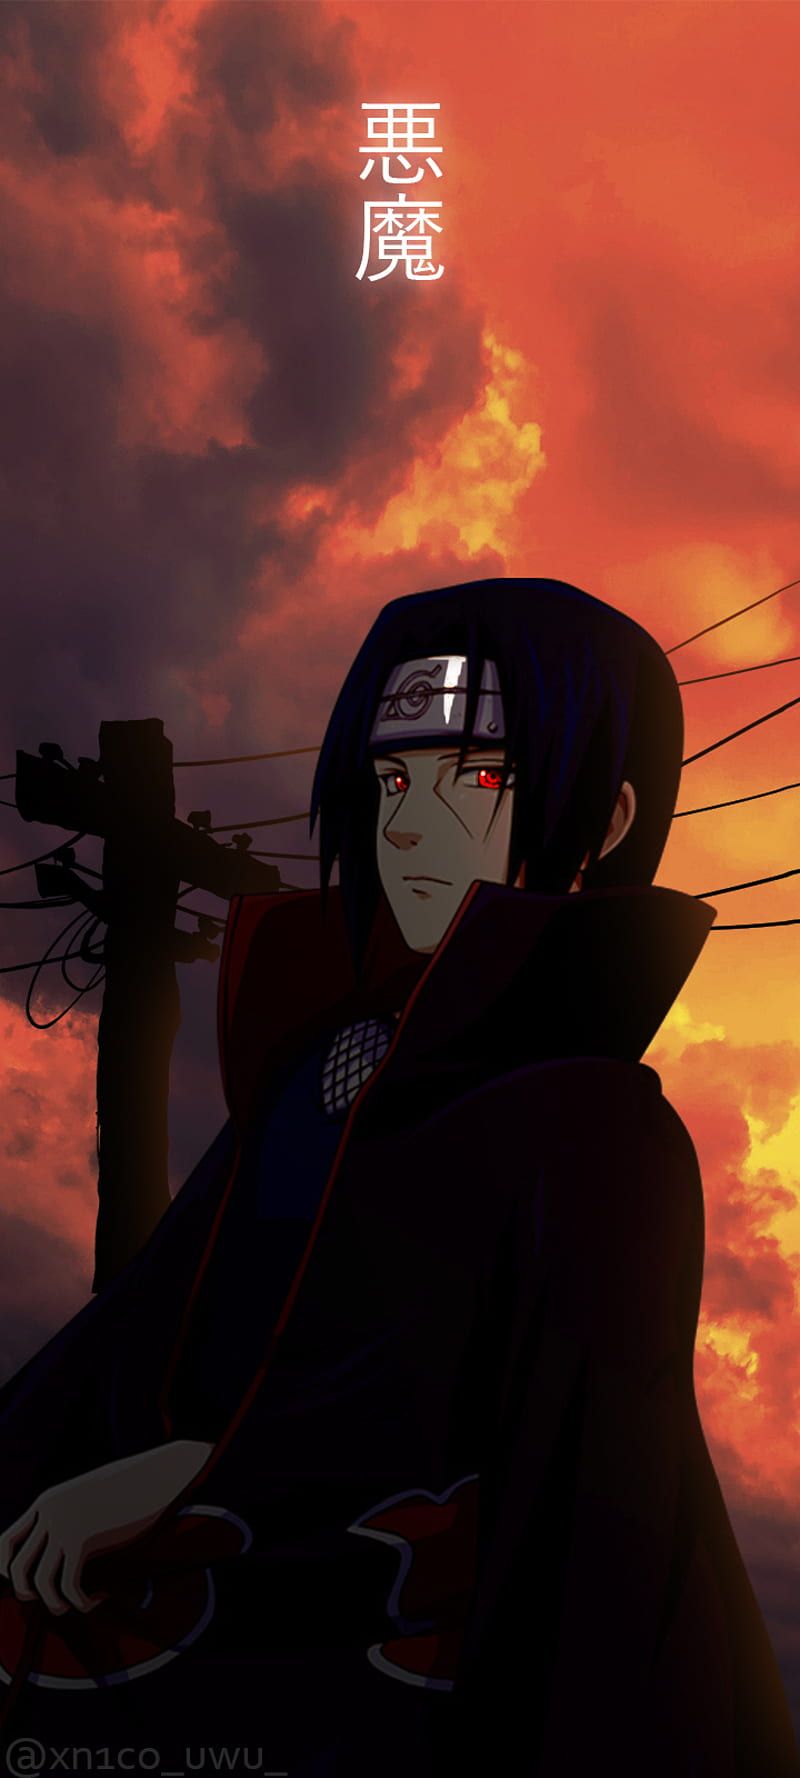 A man with red eyes and black hair - Itachi Uchiha